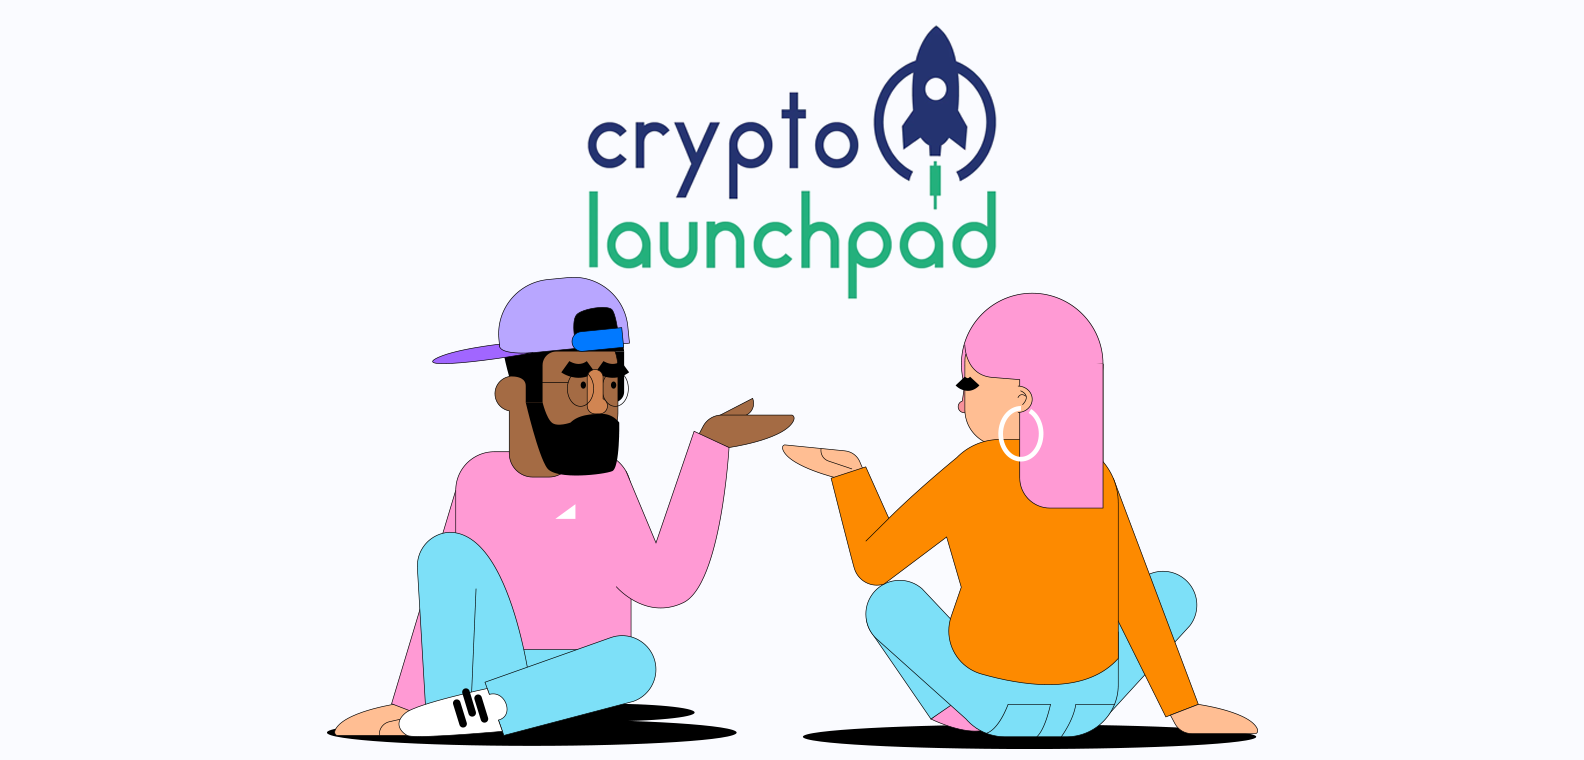 10 Crypto Launchpads You Should Know About